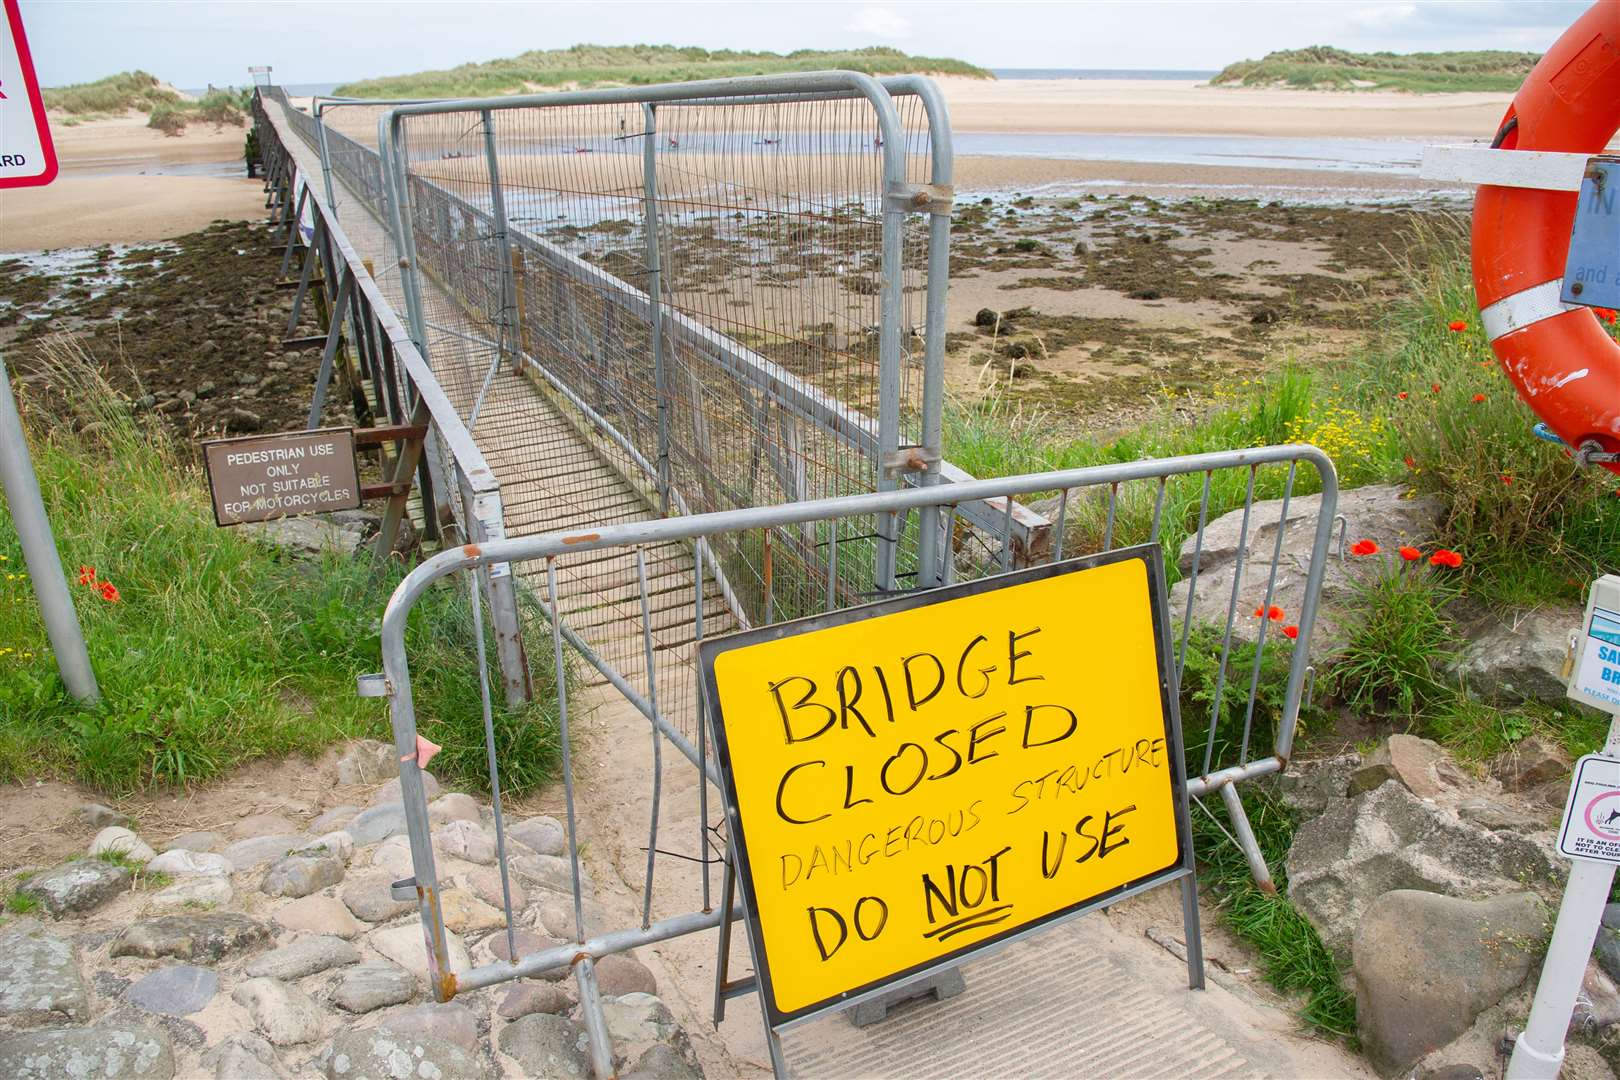 Warning on signs have not been heeded by some members of the public. Picture: Daniel Forsyth